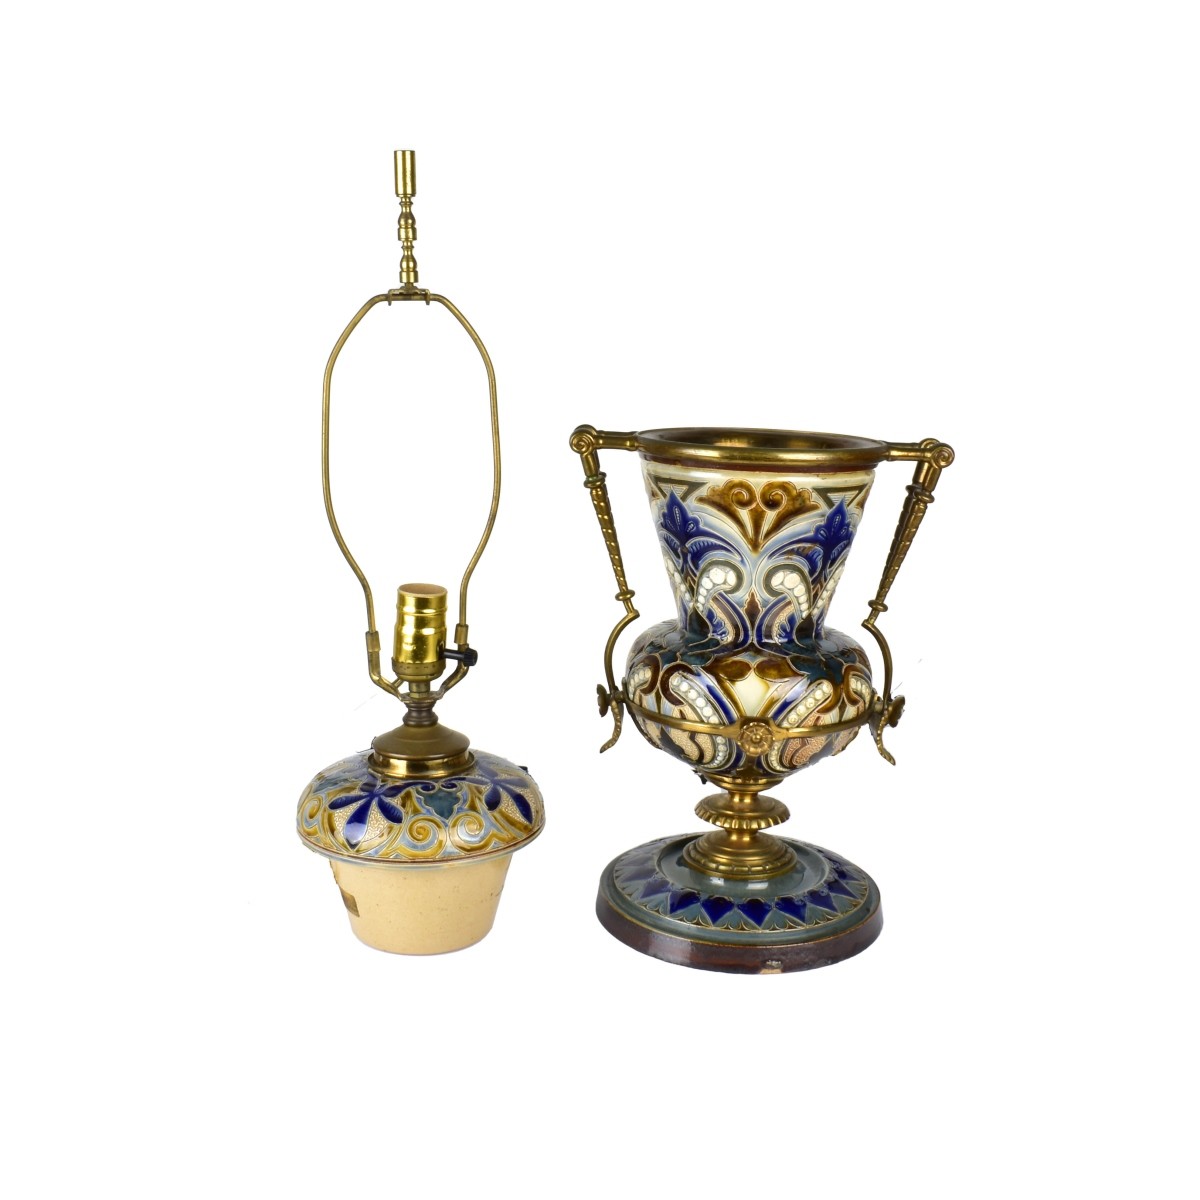 Pair of Royal Doulton Urns Mounted as Lamps